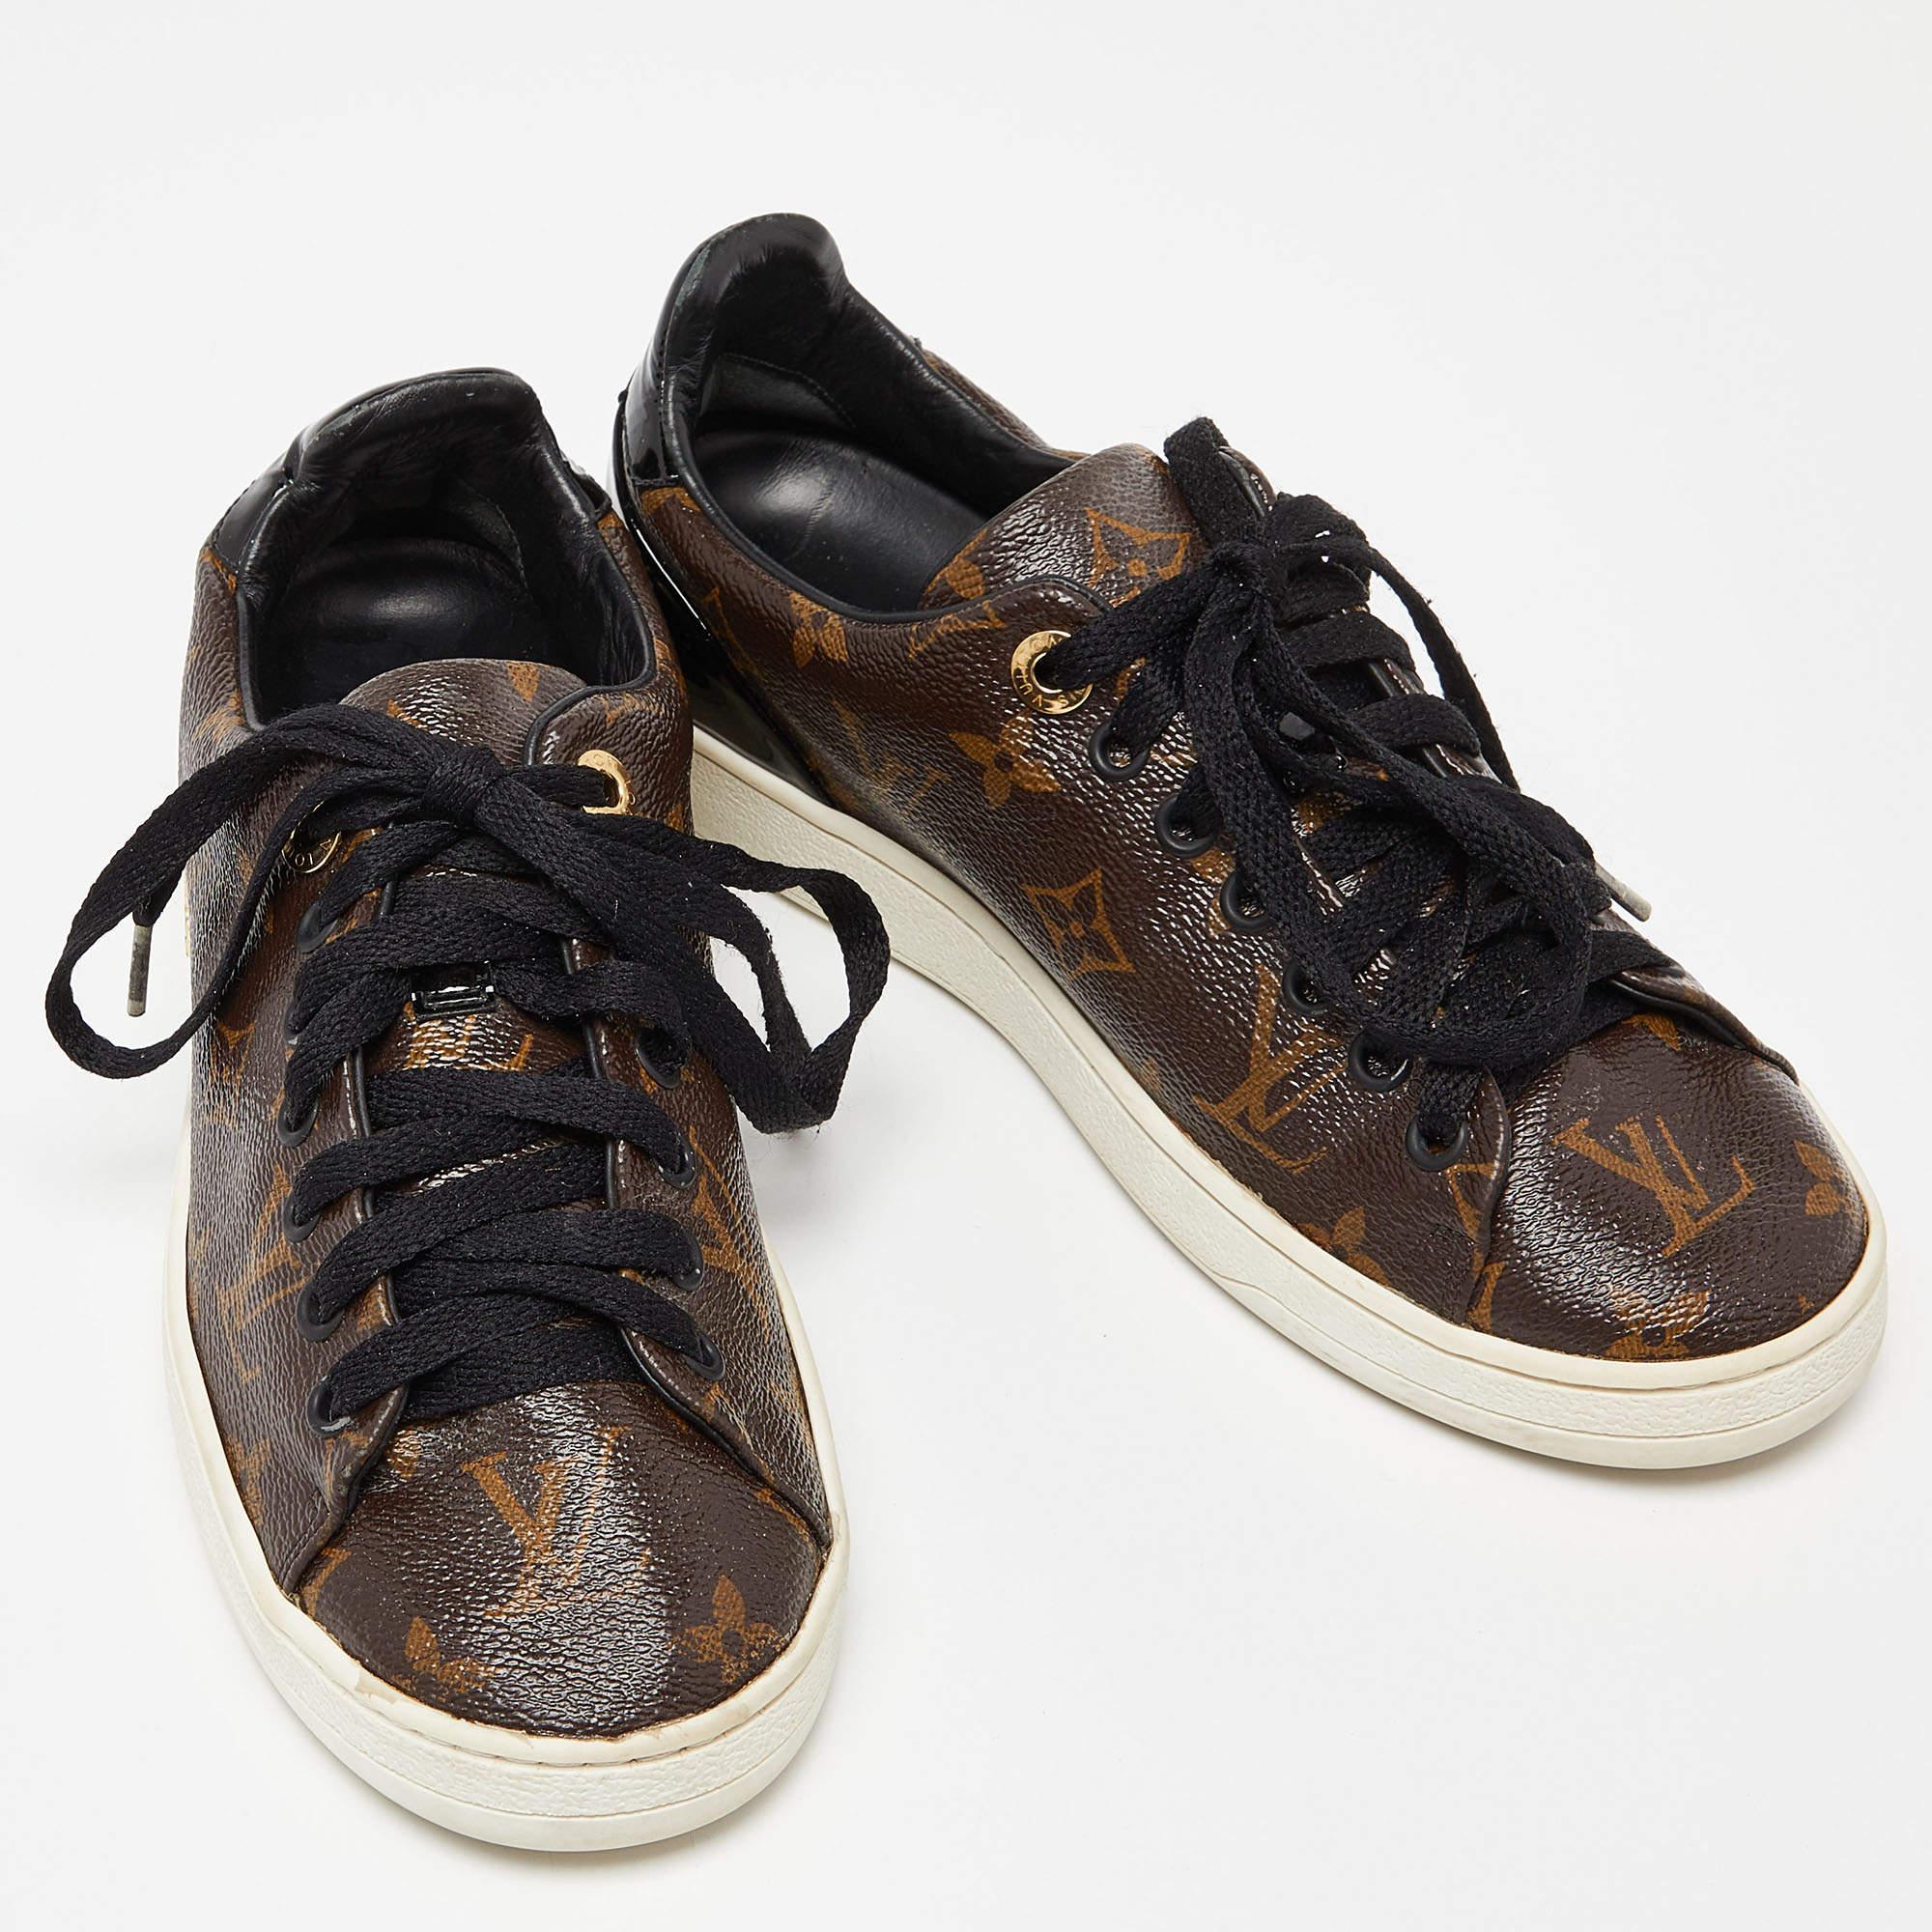 Louis Vuitton Monogram Canvas and Patent Leather Frontrow Sneakers Size 36 For Sale 1